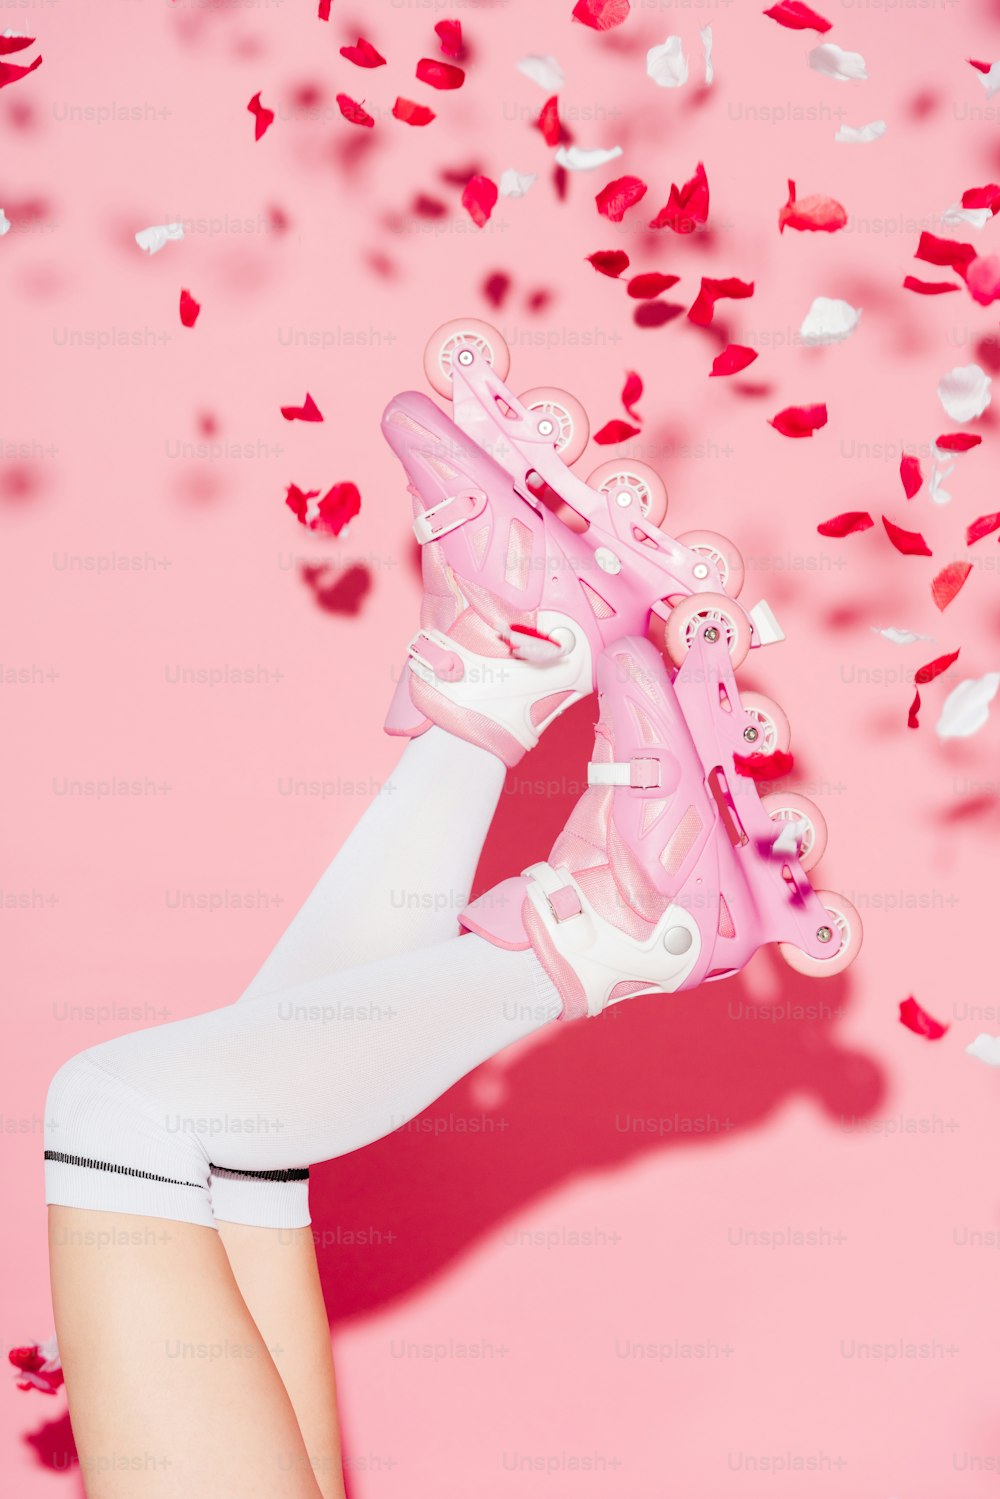 cropped view of girl wearing long socks and roller-skates near rose petals on pink